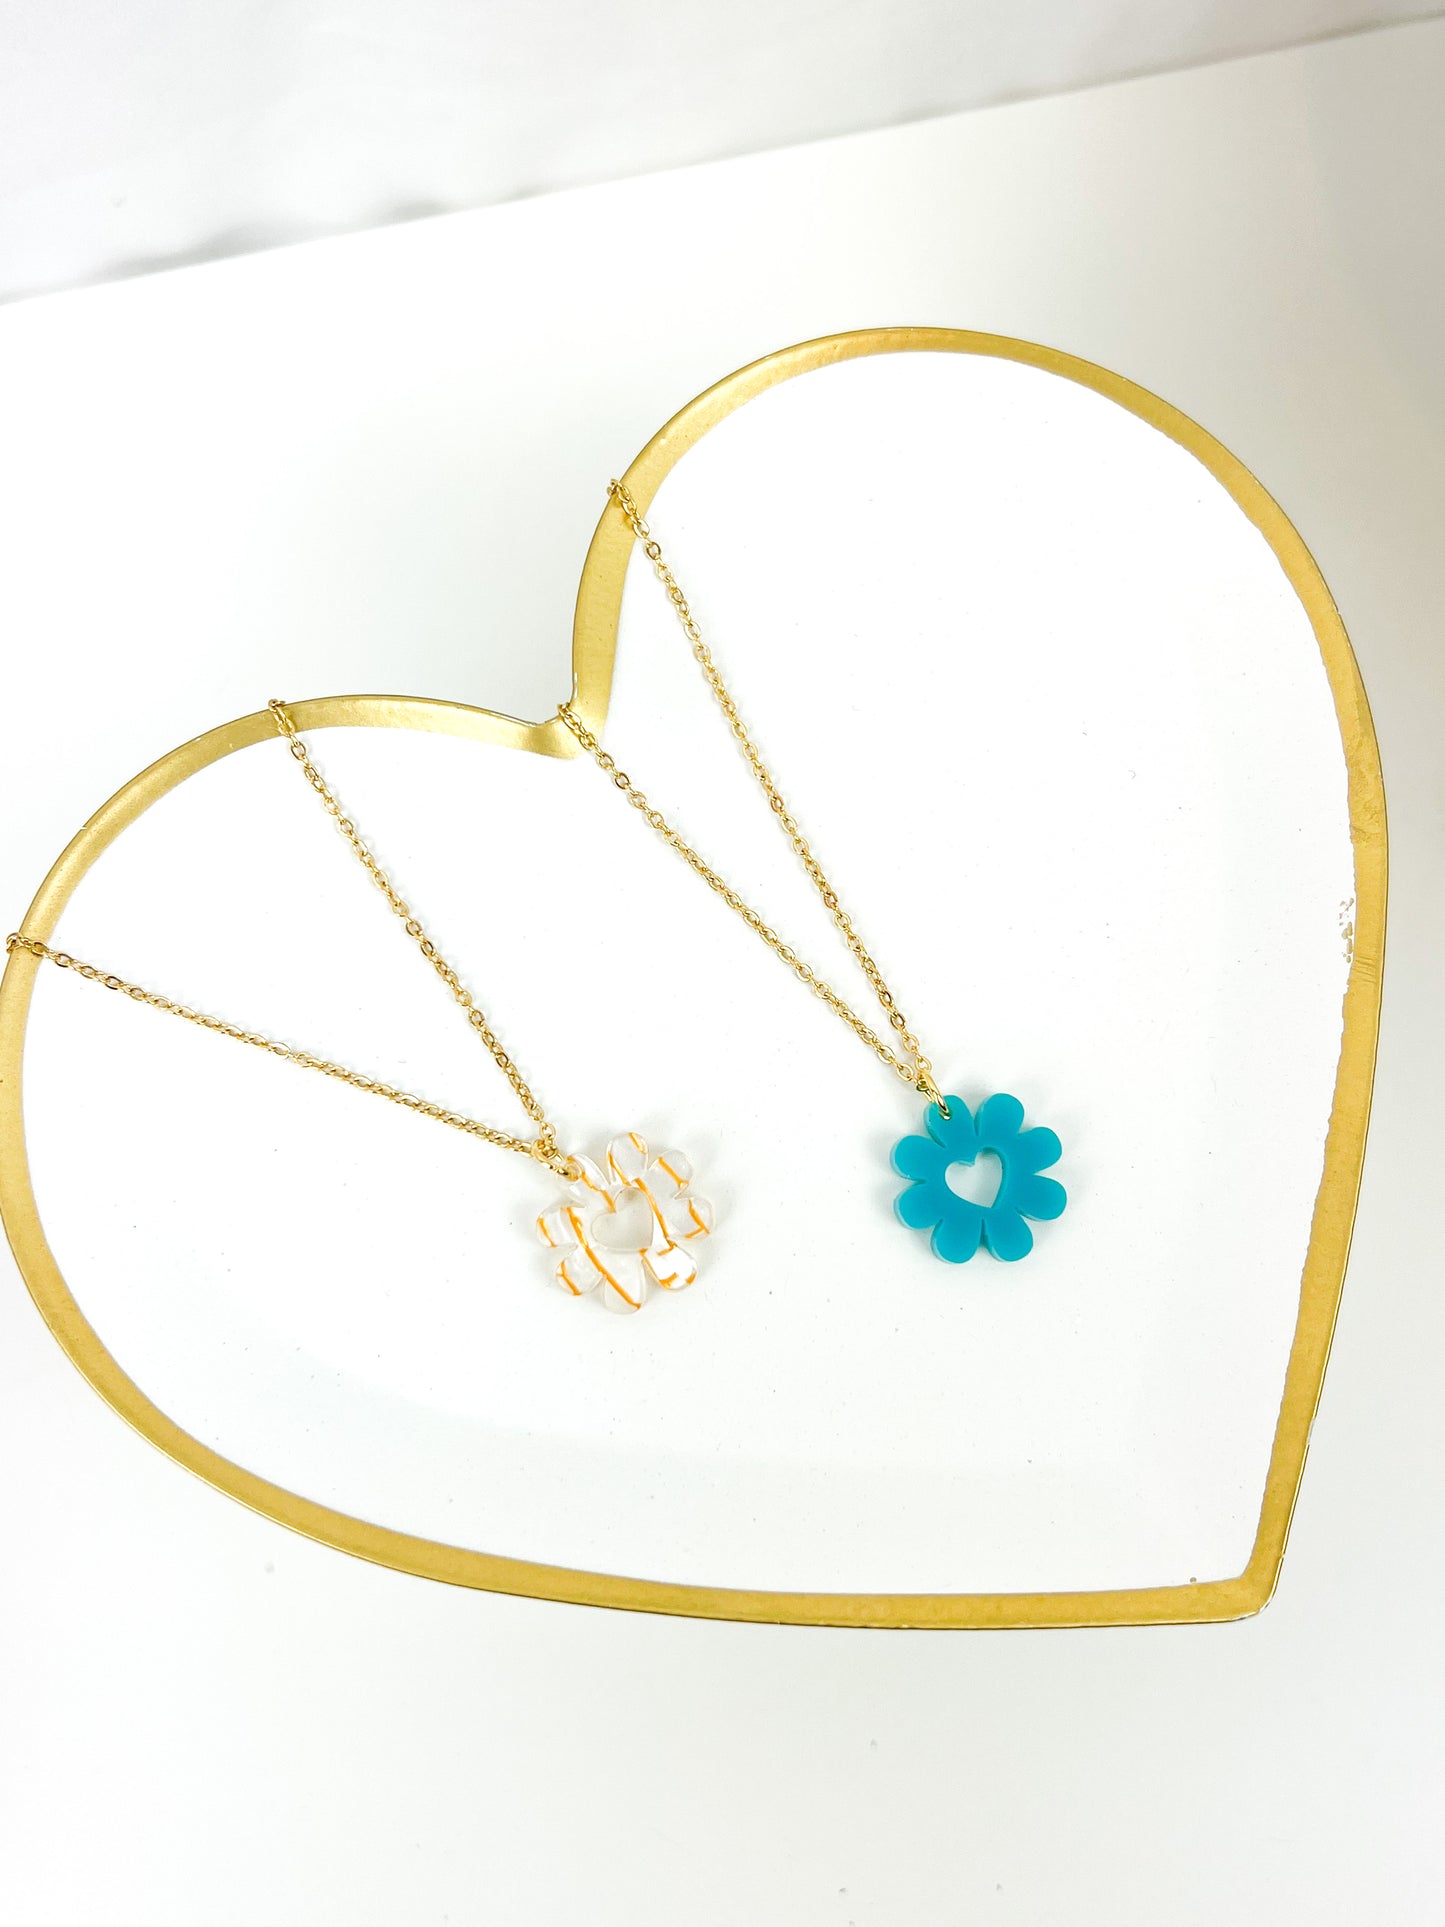 Flowers & Hearts Necklace